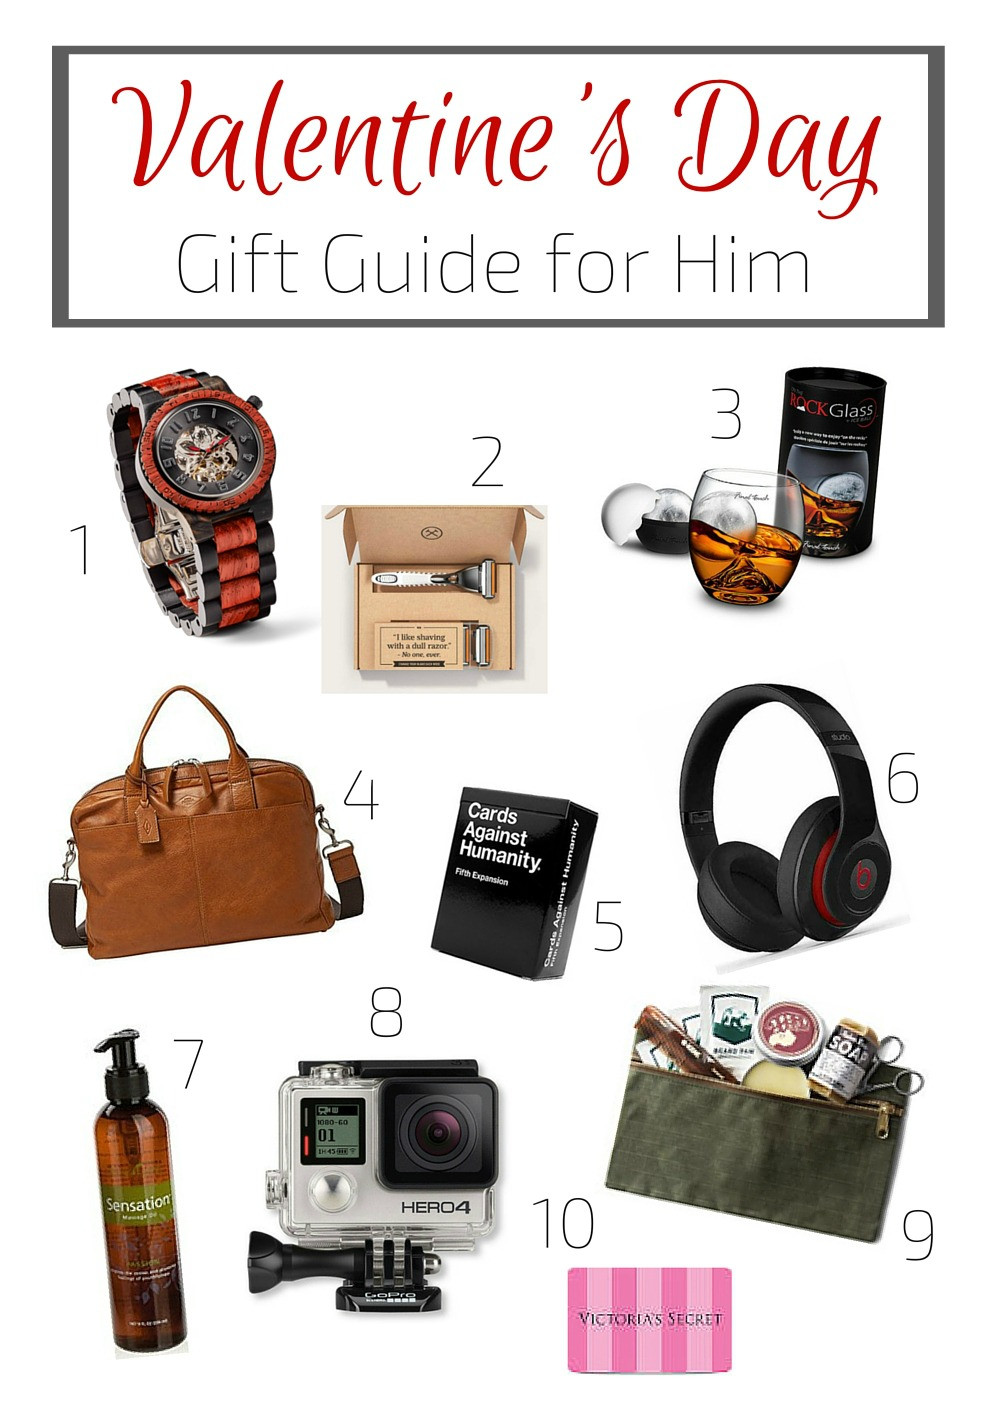 Valentines Day Gifts For Him 2016
 Valentine’s Day Gift Guide for Him